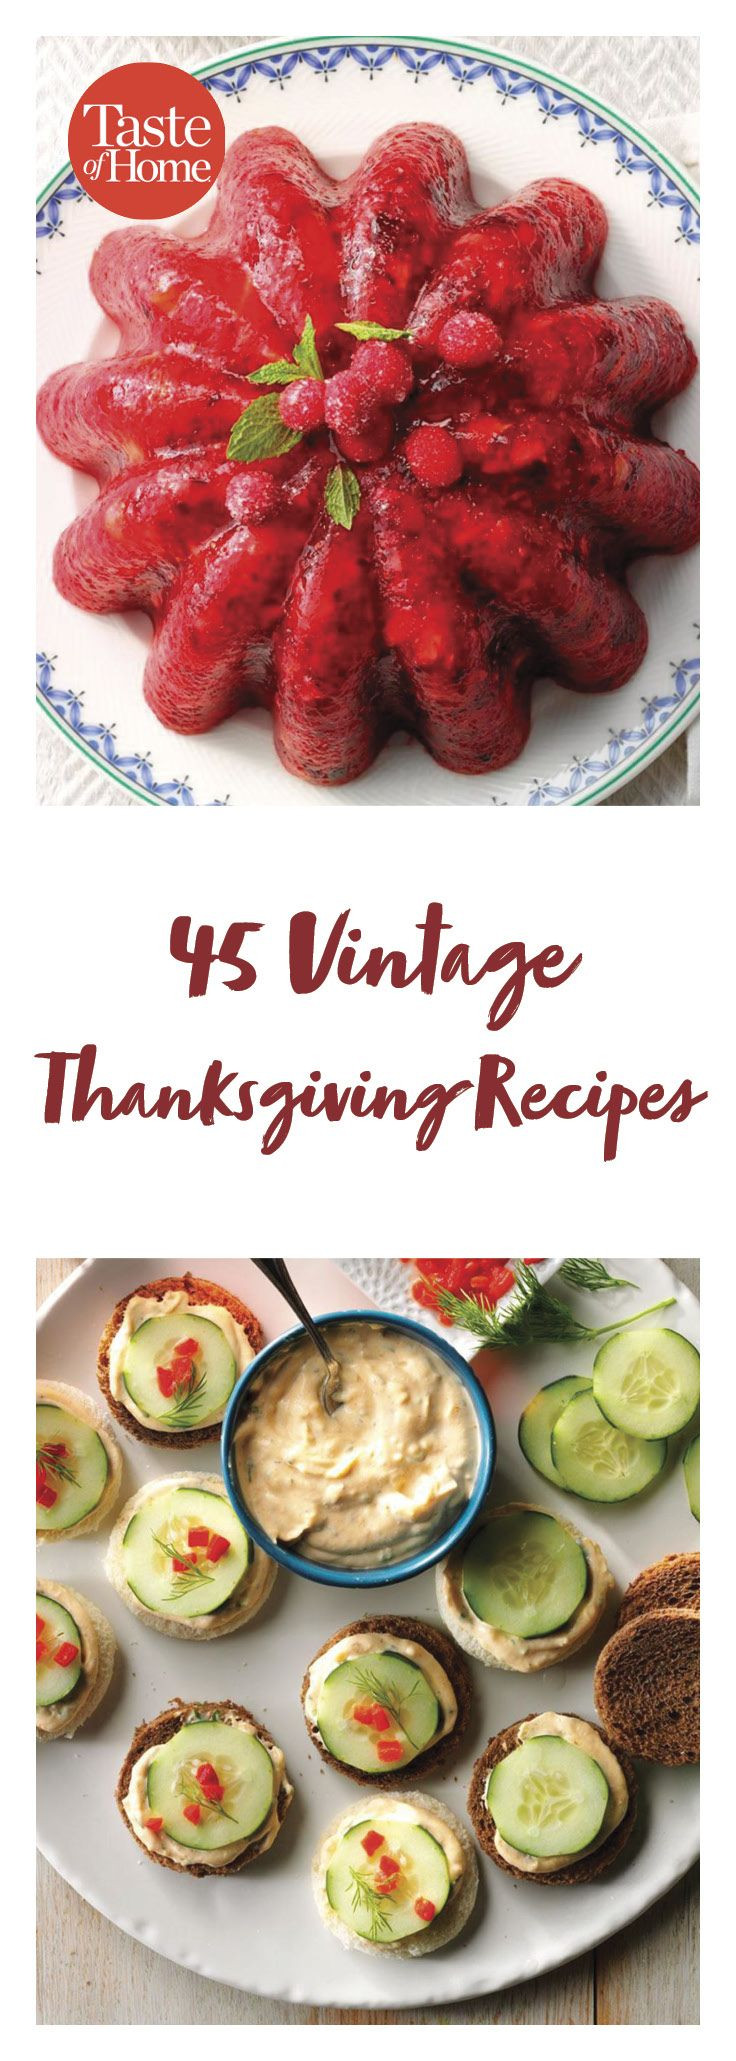 Thanksgiving Desserts 2019
 45 Vintage Inspired Thanksgiving Recipes in 2019